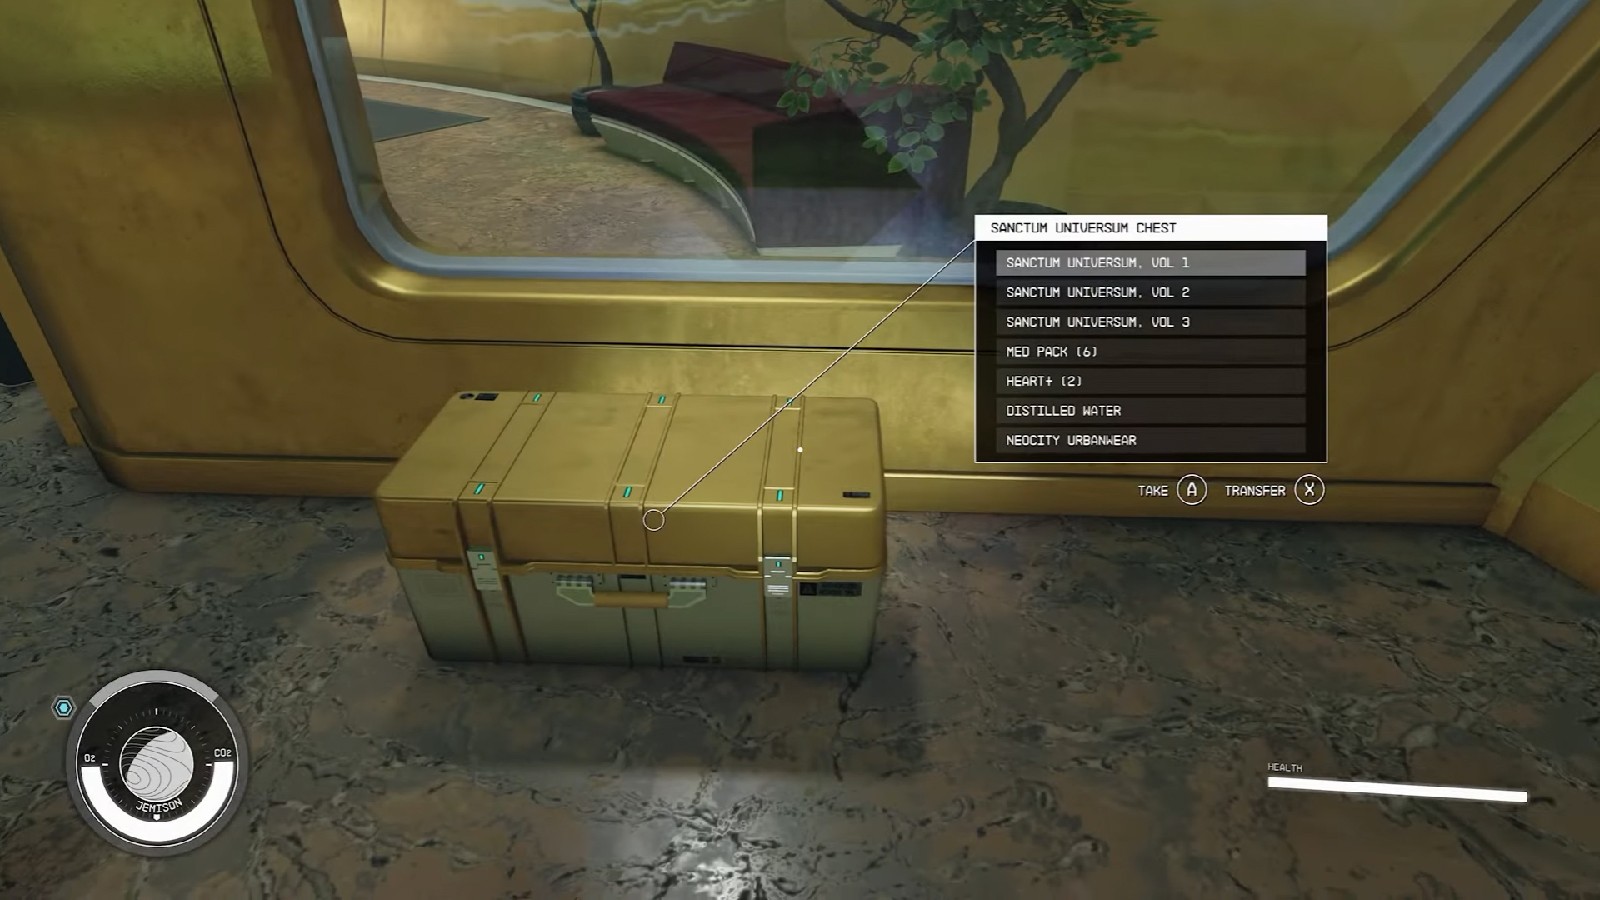 Screengrab from Starfield showing the contents of the chest players get if they choose Riased Universal